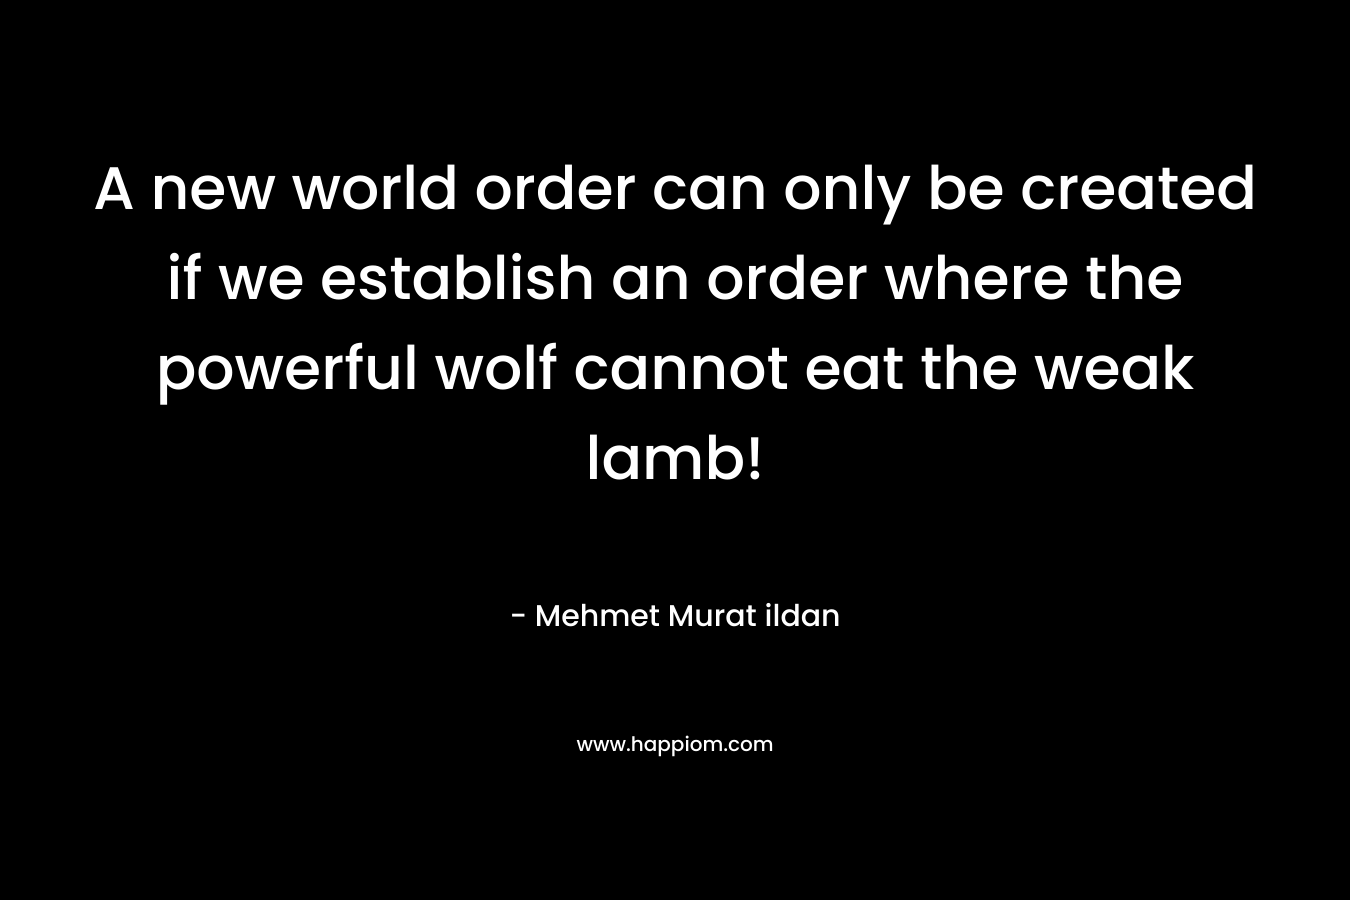 A new world order can only be created if we establish an order where the powerful wolf cannot eat the weak lamb!